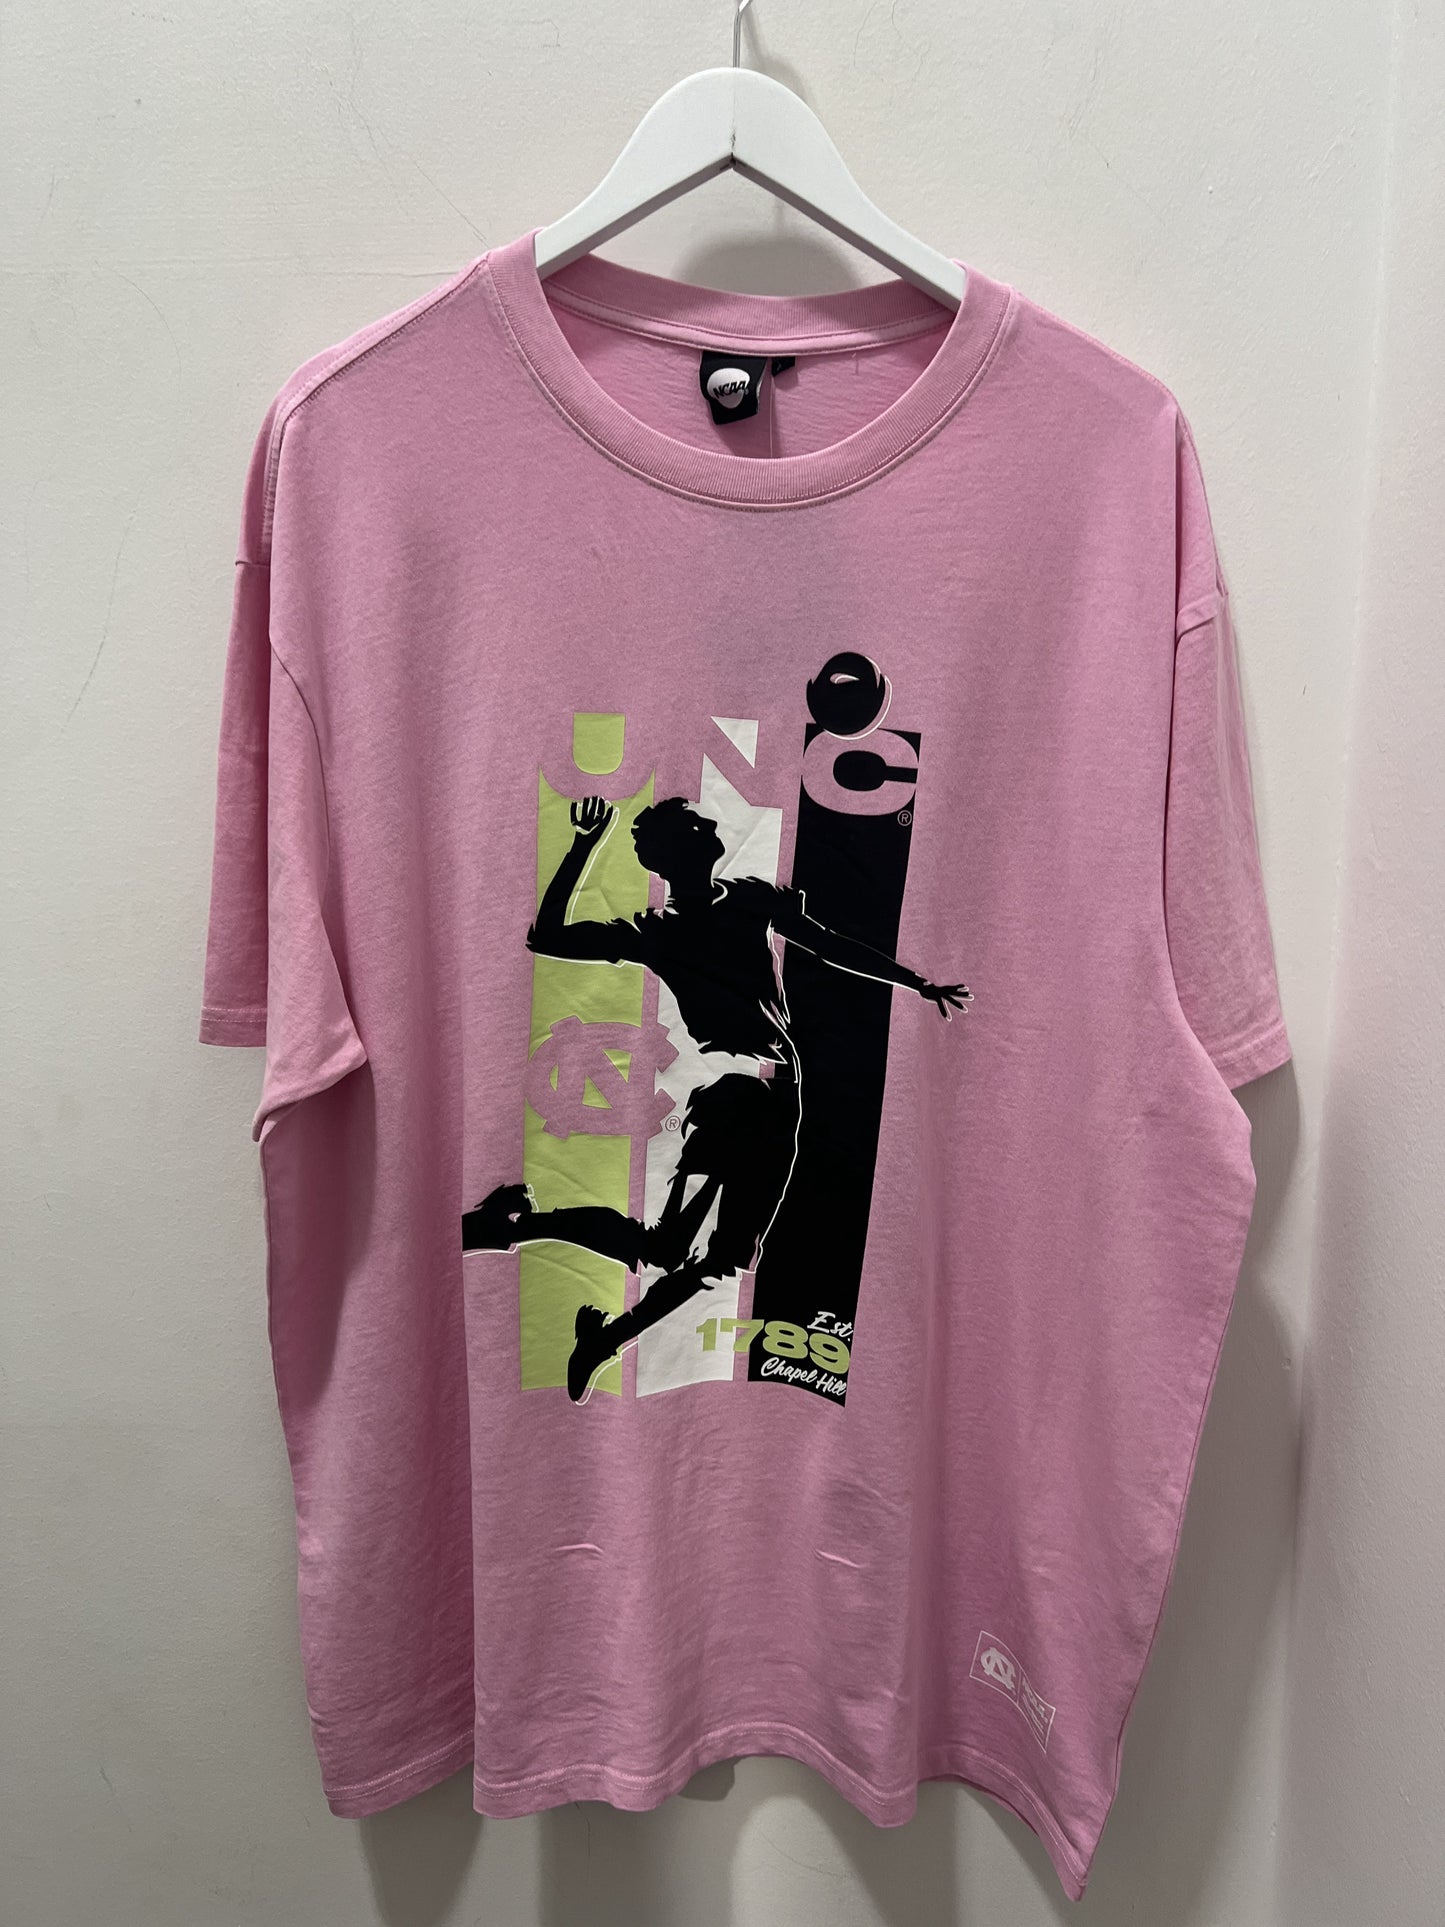 UNC VOLLEYBALL TEE - VINTAGE PINK